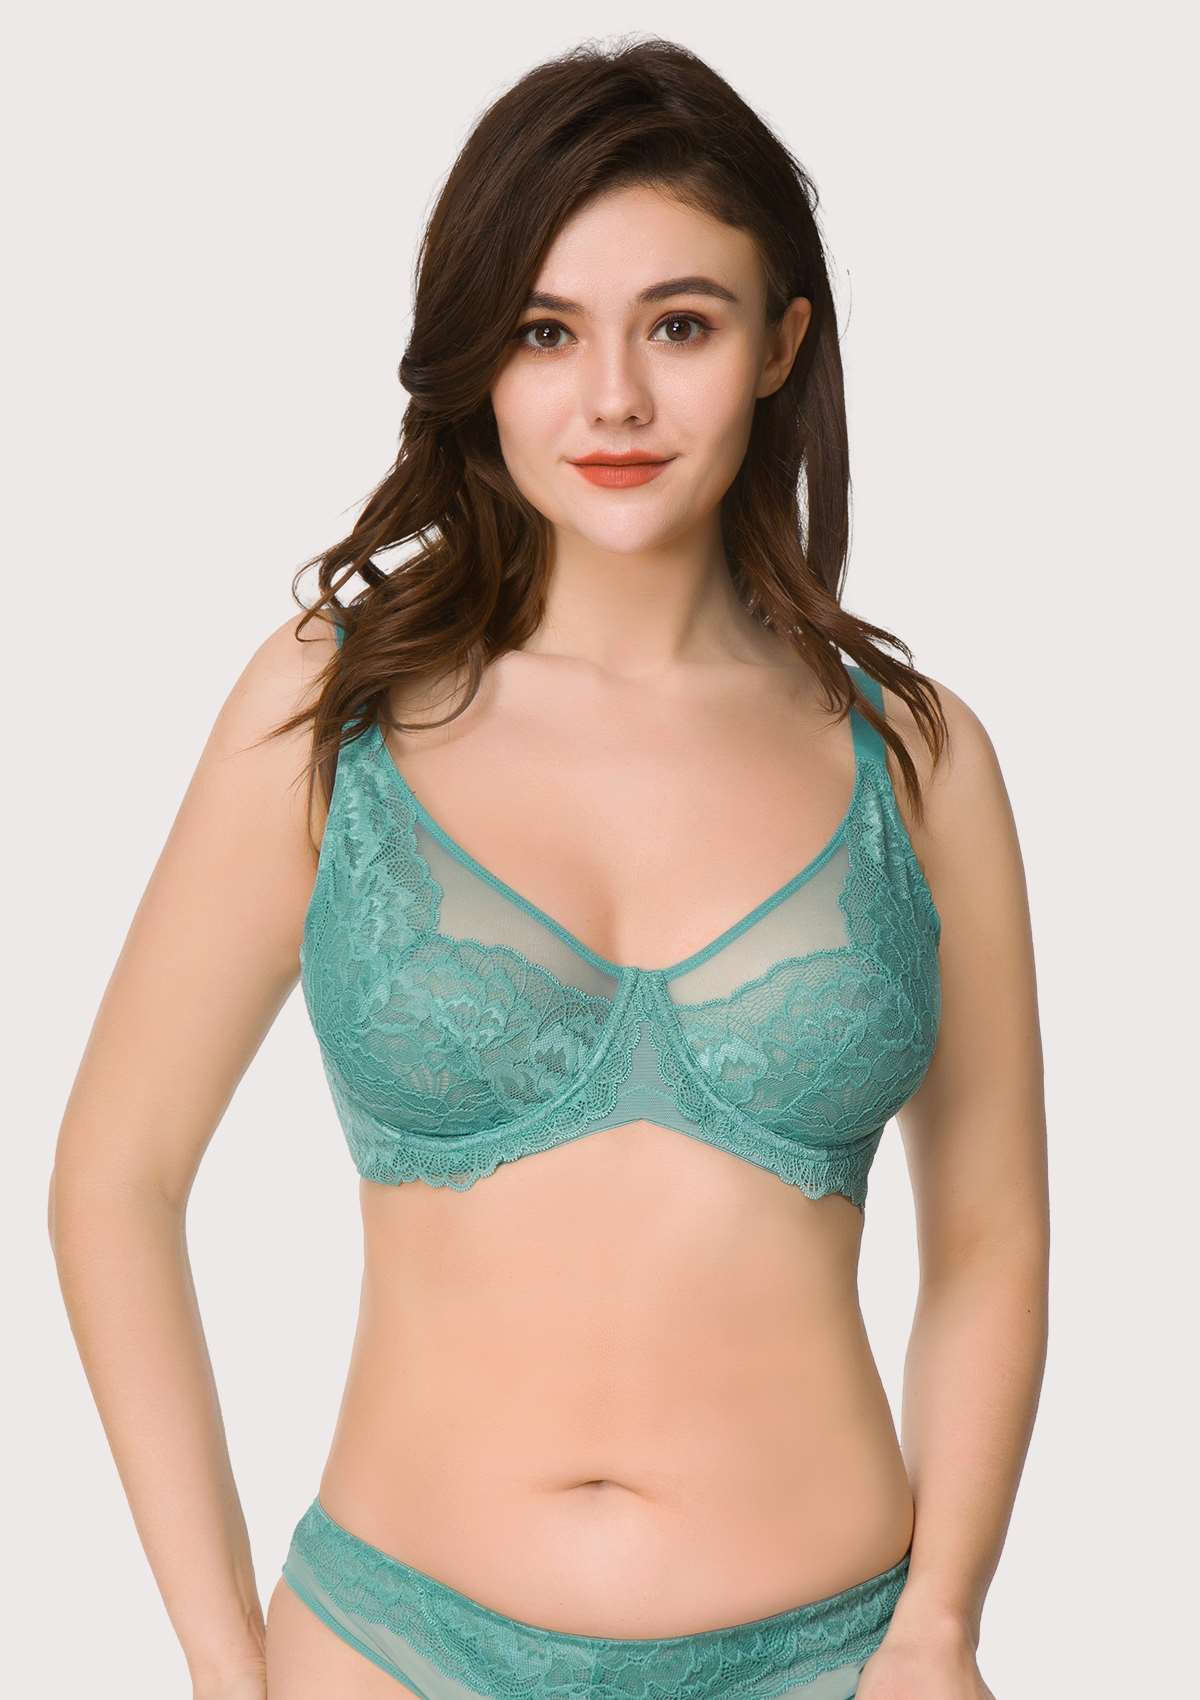 HSIA Peony Lace Unlined Supportive Underwire Bra - Light Coral / 36 / DDD/F